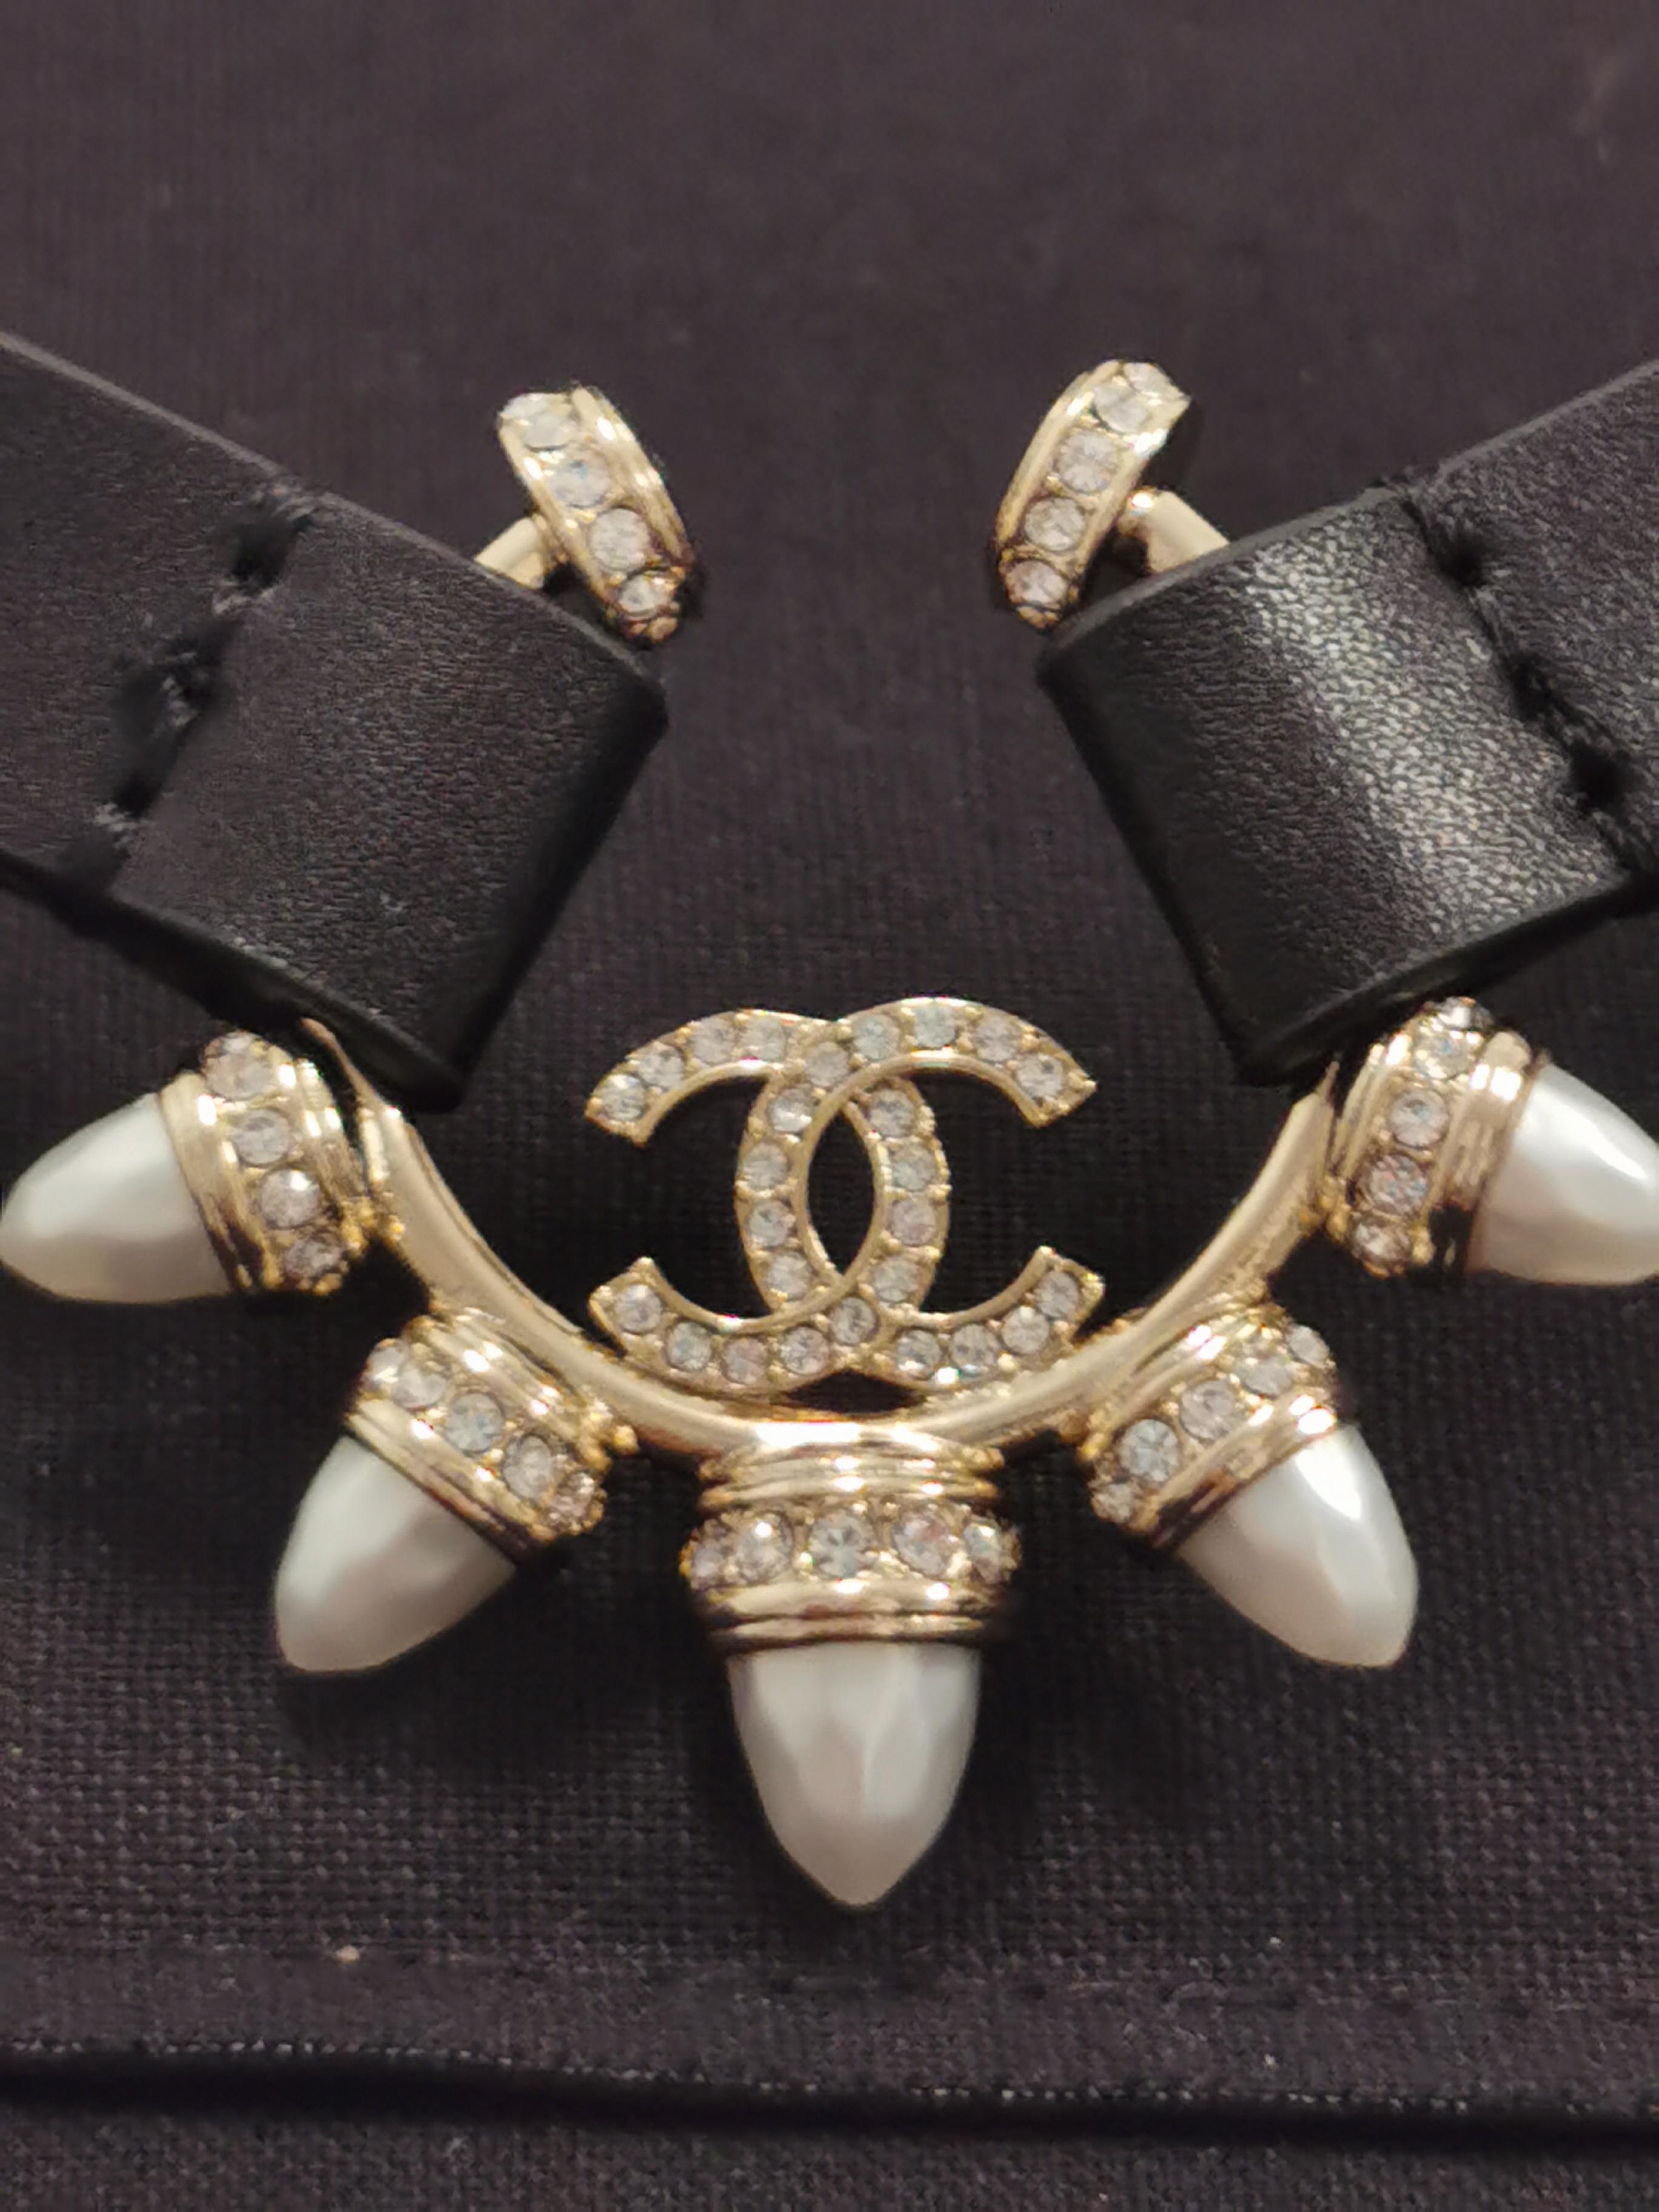 Introducing the epitome of elegance and sophistication - the Chanel Crescent Pearl Choker. Merging timeless glamour with contemporary design, this exquisite piece is a celebration of luxury and refinement.

Crafted with meticulous attention to